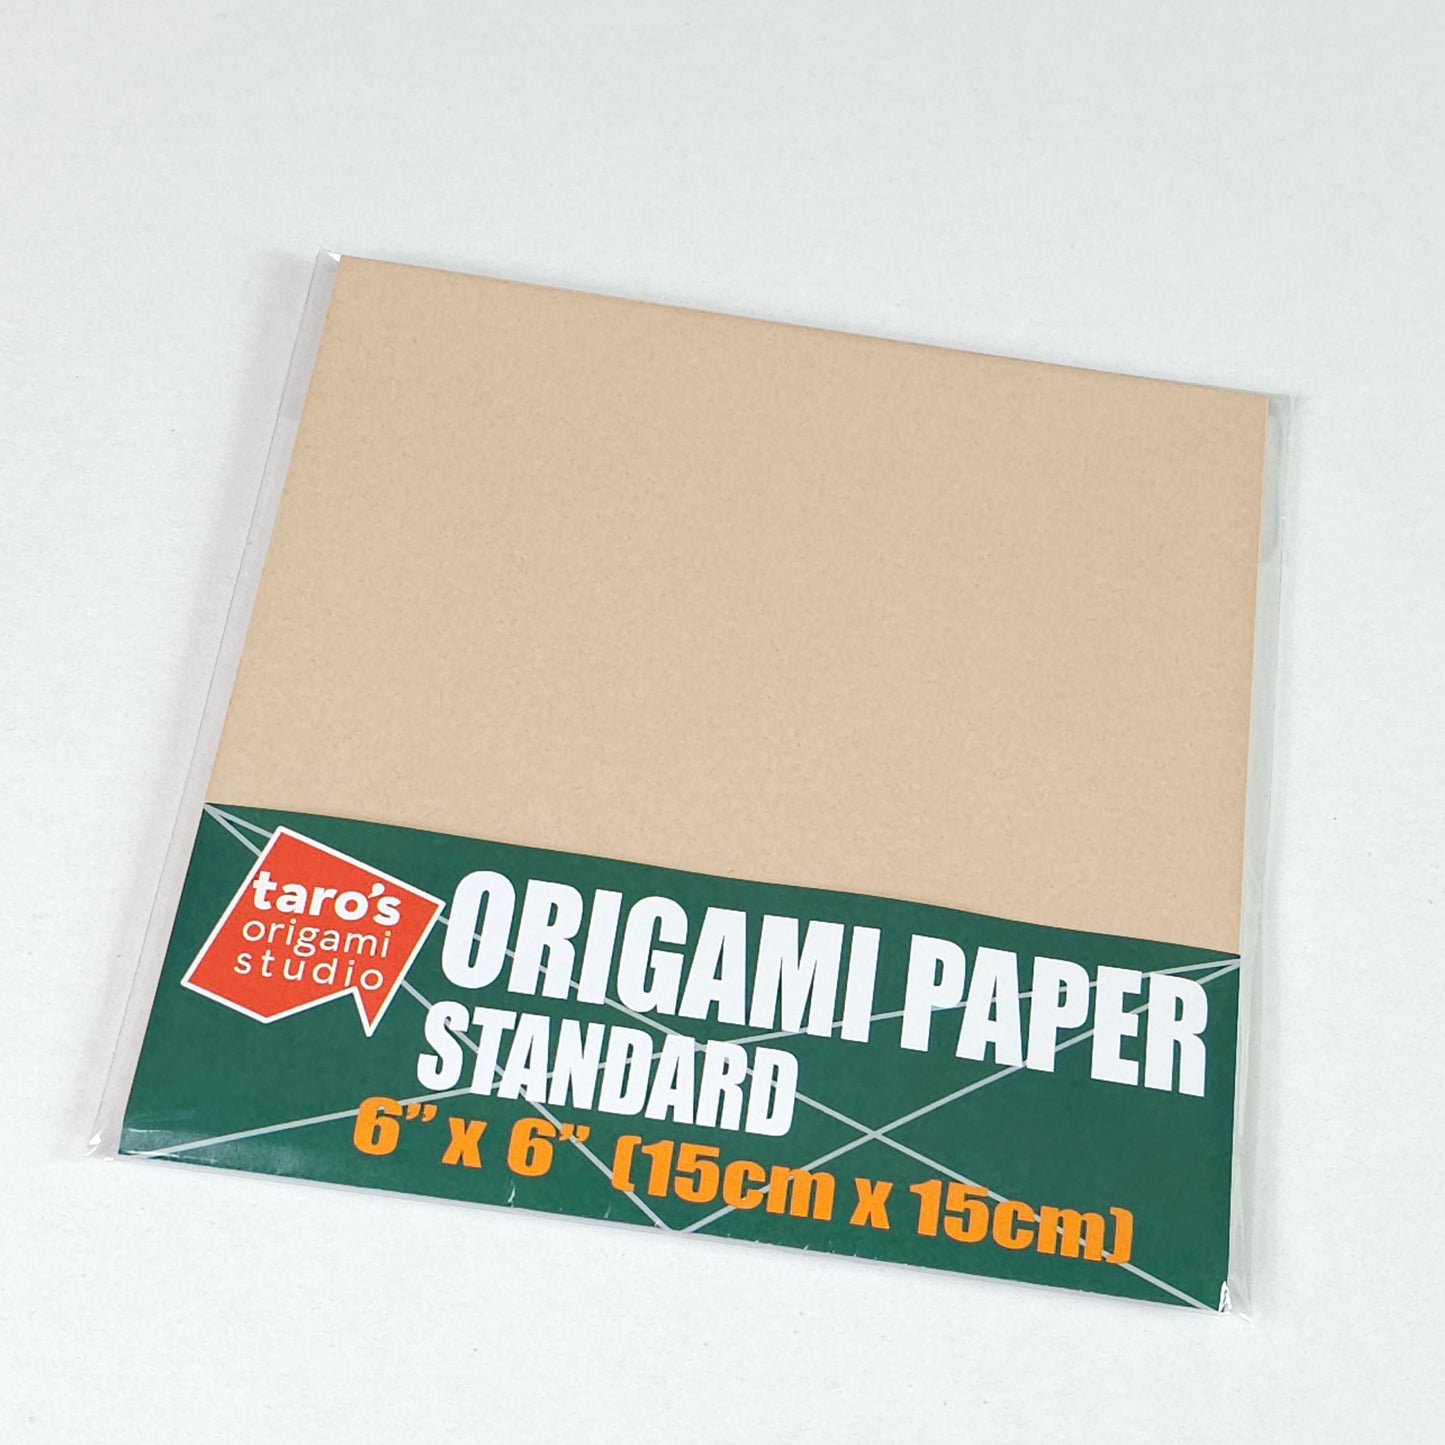 Standard 6 Inch One Sided Single Color (Beige) 50 Sheets (All Same Color) Square Easy Fold Premium Japanese Paper for Beginner (Made in Japan)